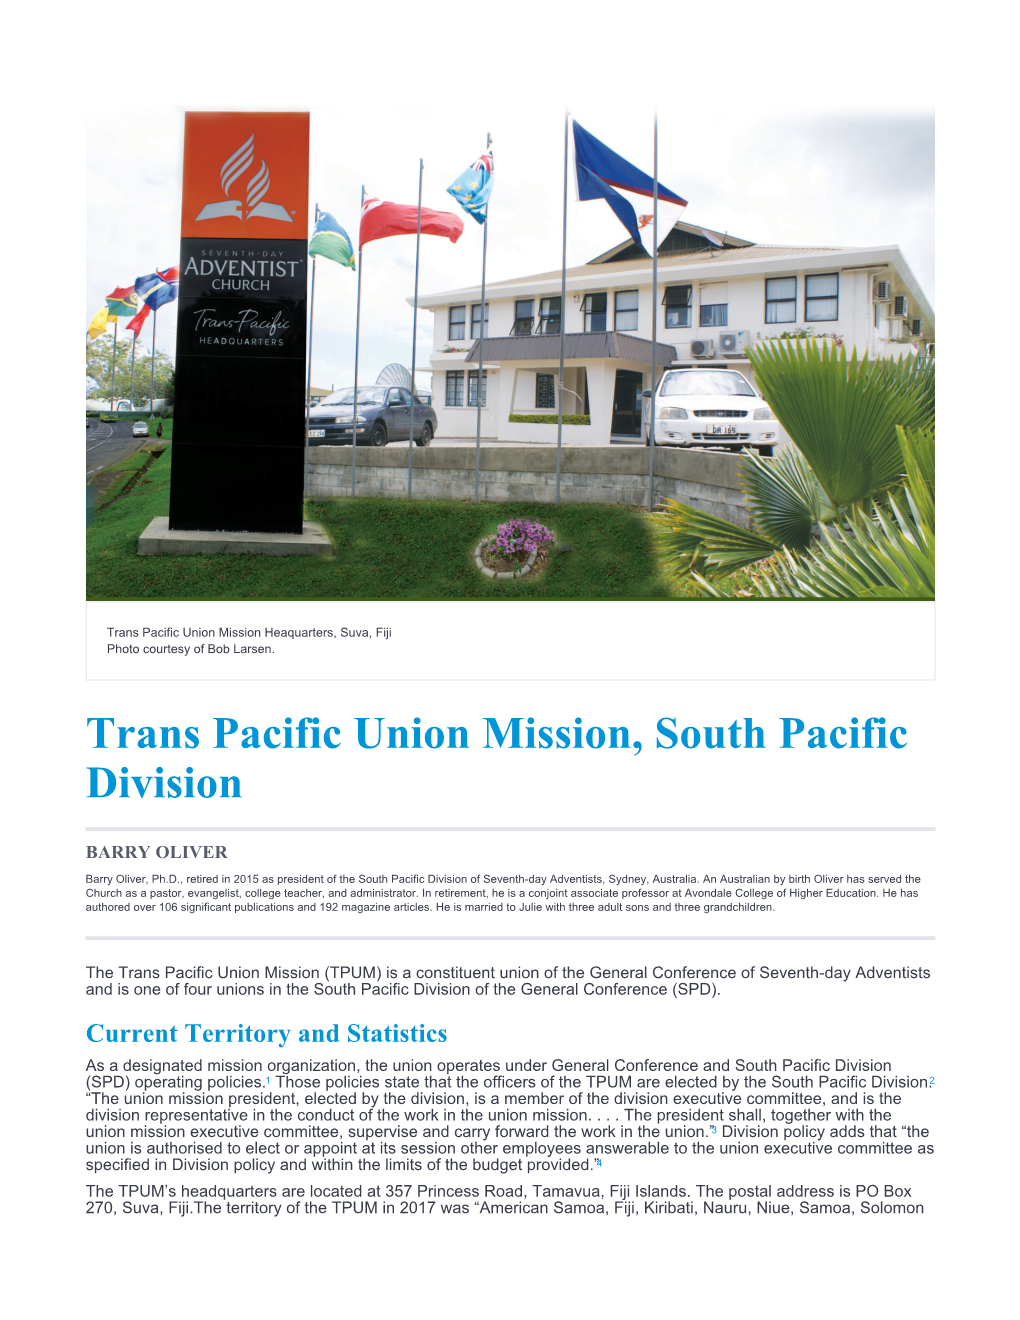 Trans Pacific Union Mission, South Pacific Division